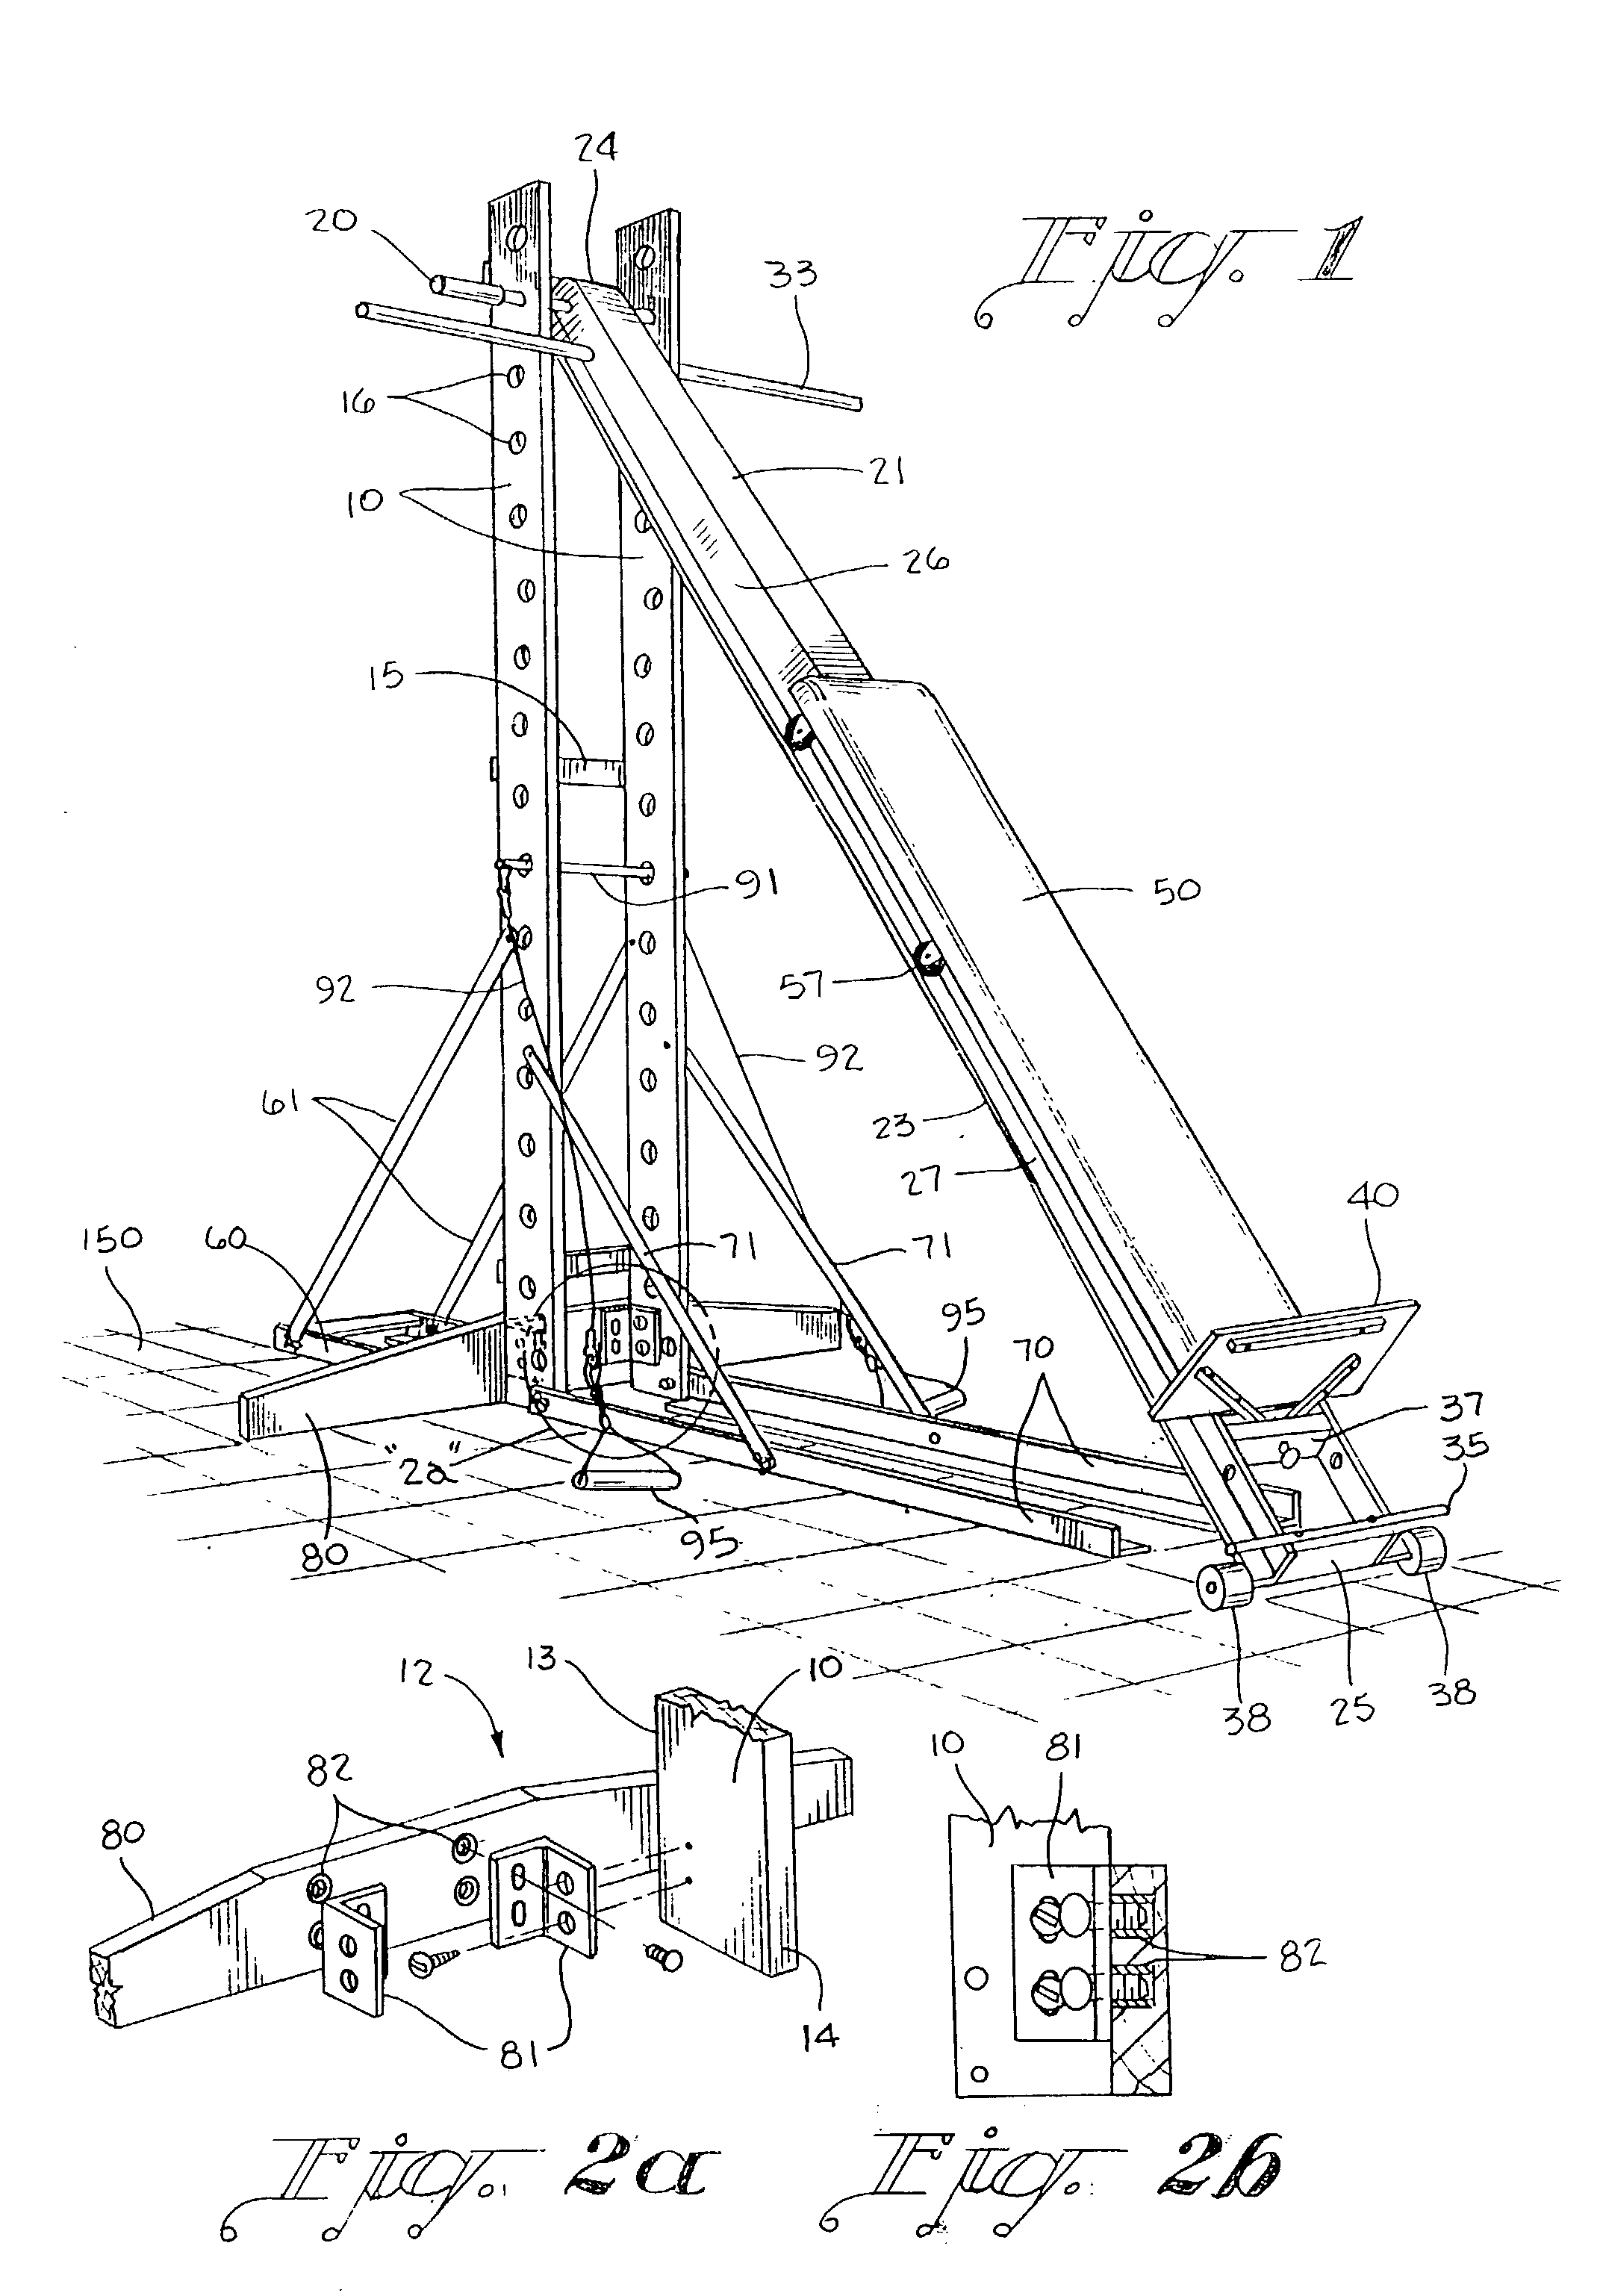 Exercise apparatus and method of collapsing the same